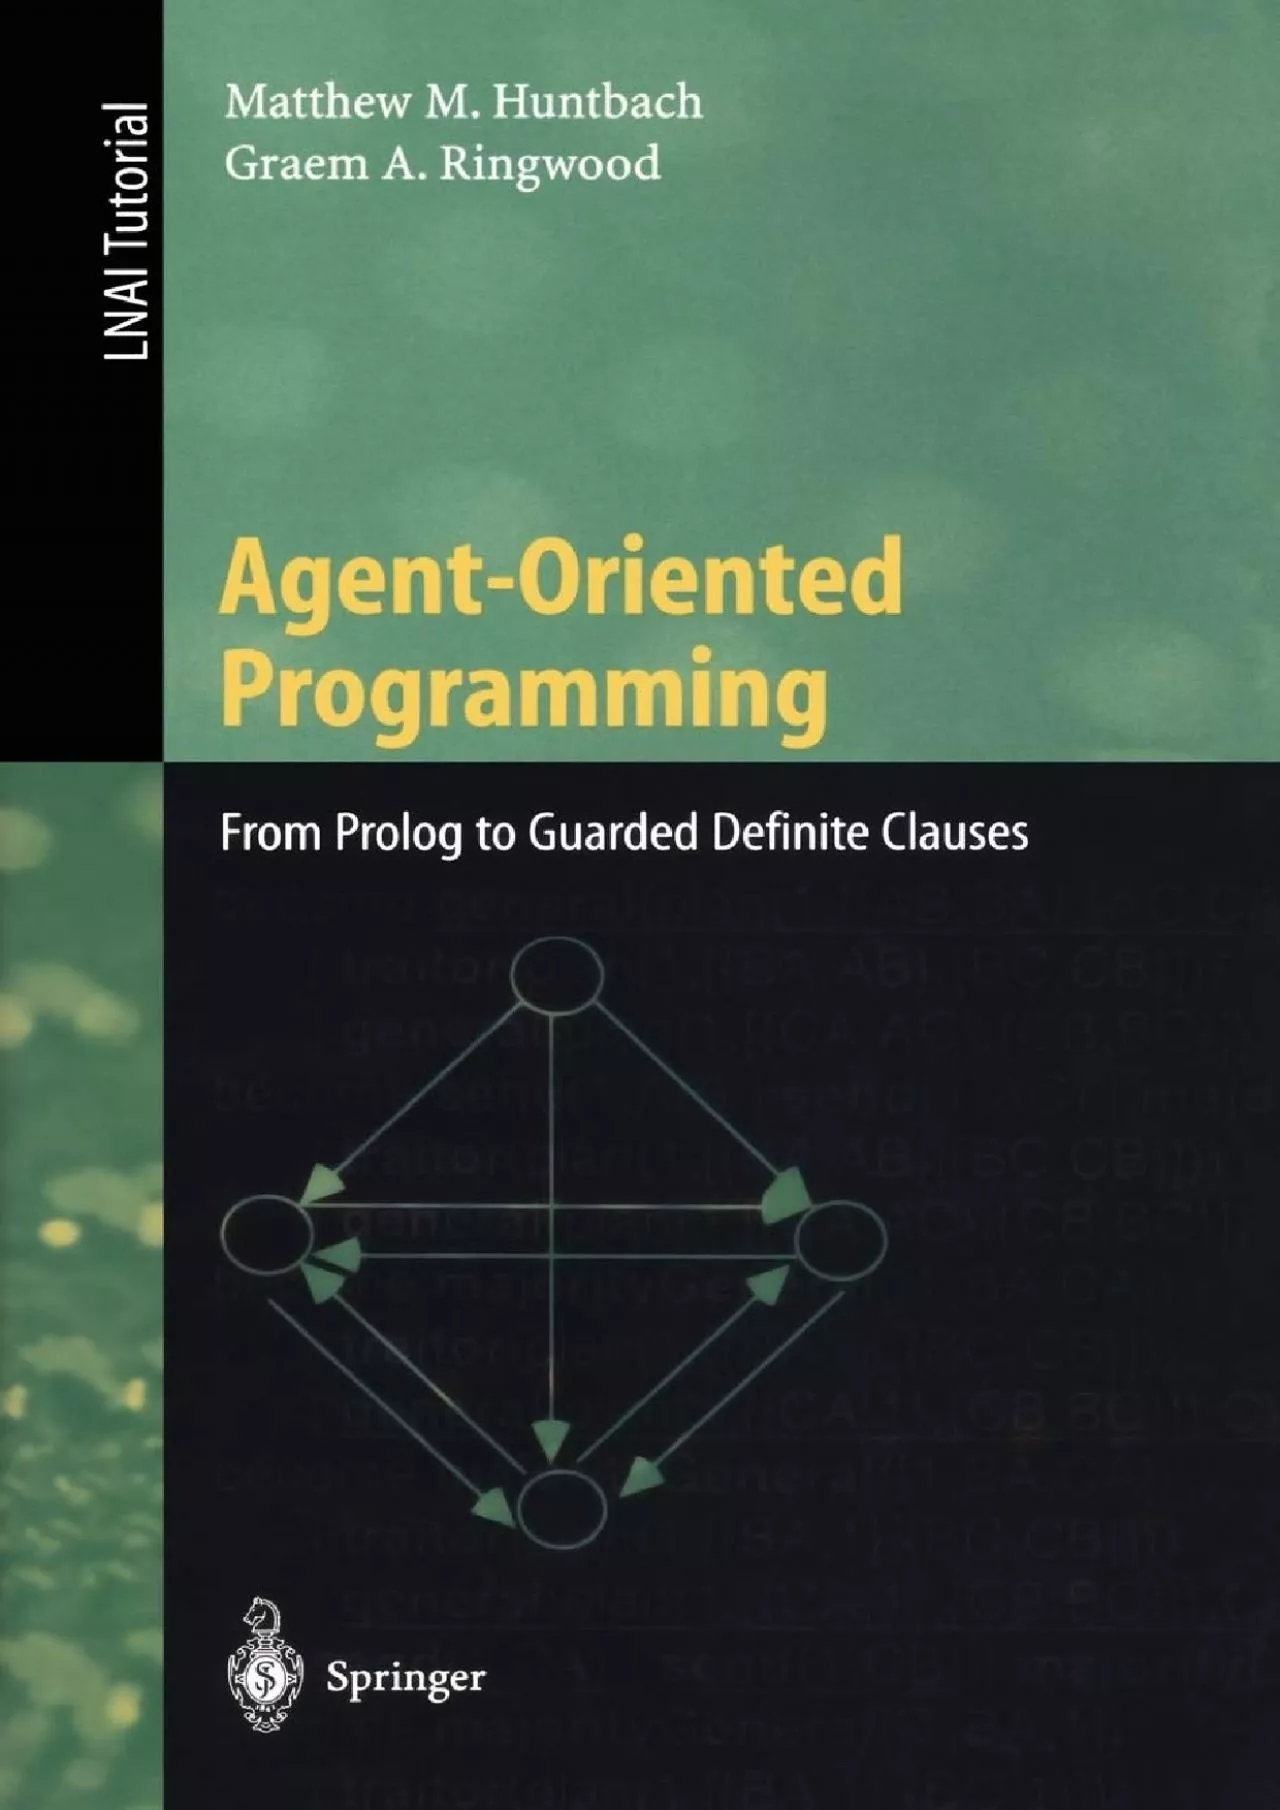 [READING BOOK]-Agent-Oriented Programming: From Prolog to Guarded Definite Clauses (Lecture